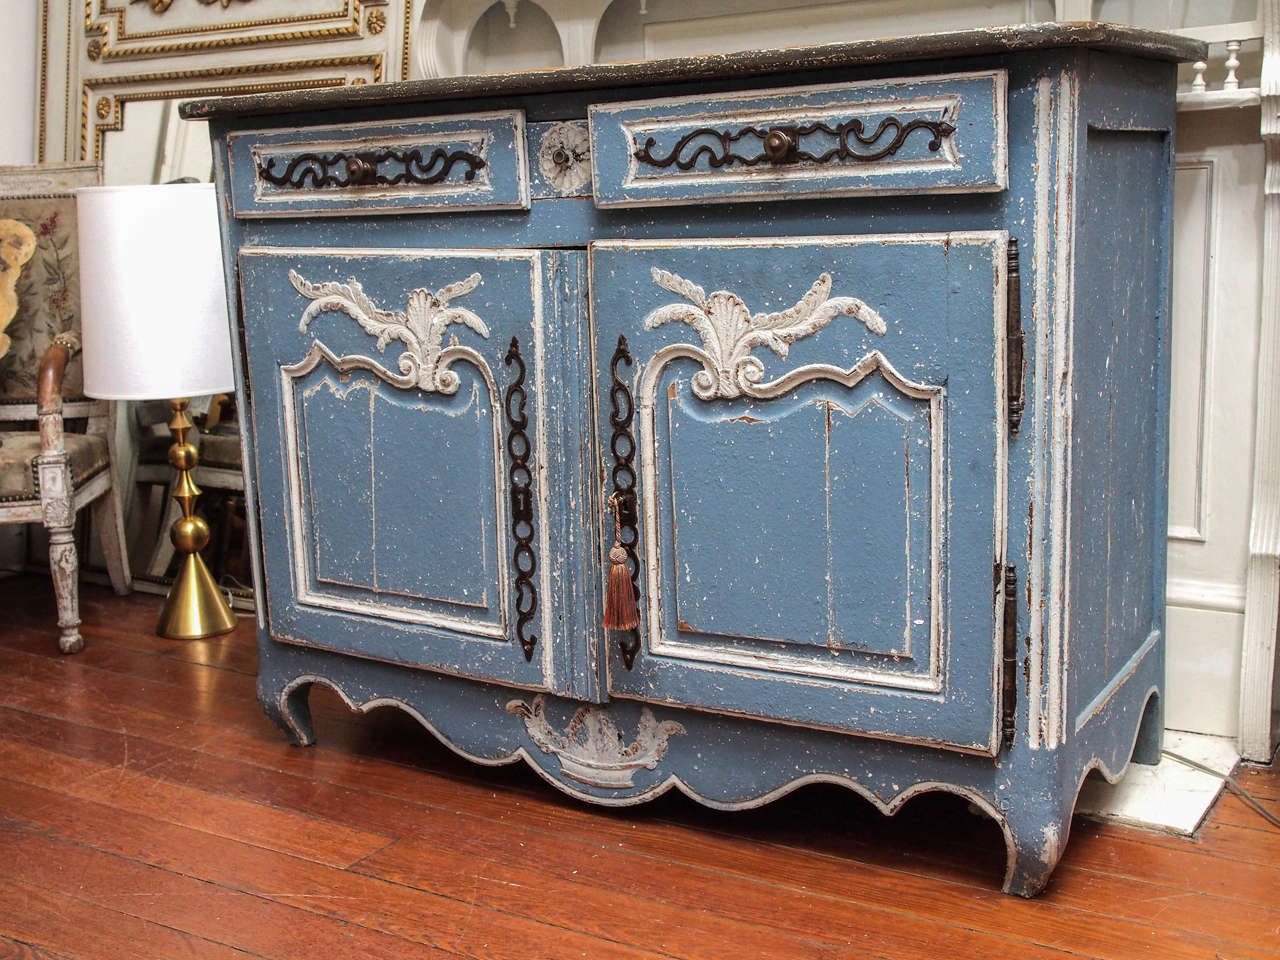 Early 19th century walnut two doors, three drawers (one very small one in the center) painted buffet. Louis XV style. Flower basket motif at the bottom center. Painted in blue and cream. Top is a charcoal color.